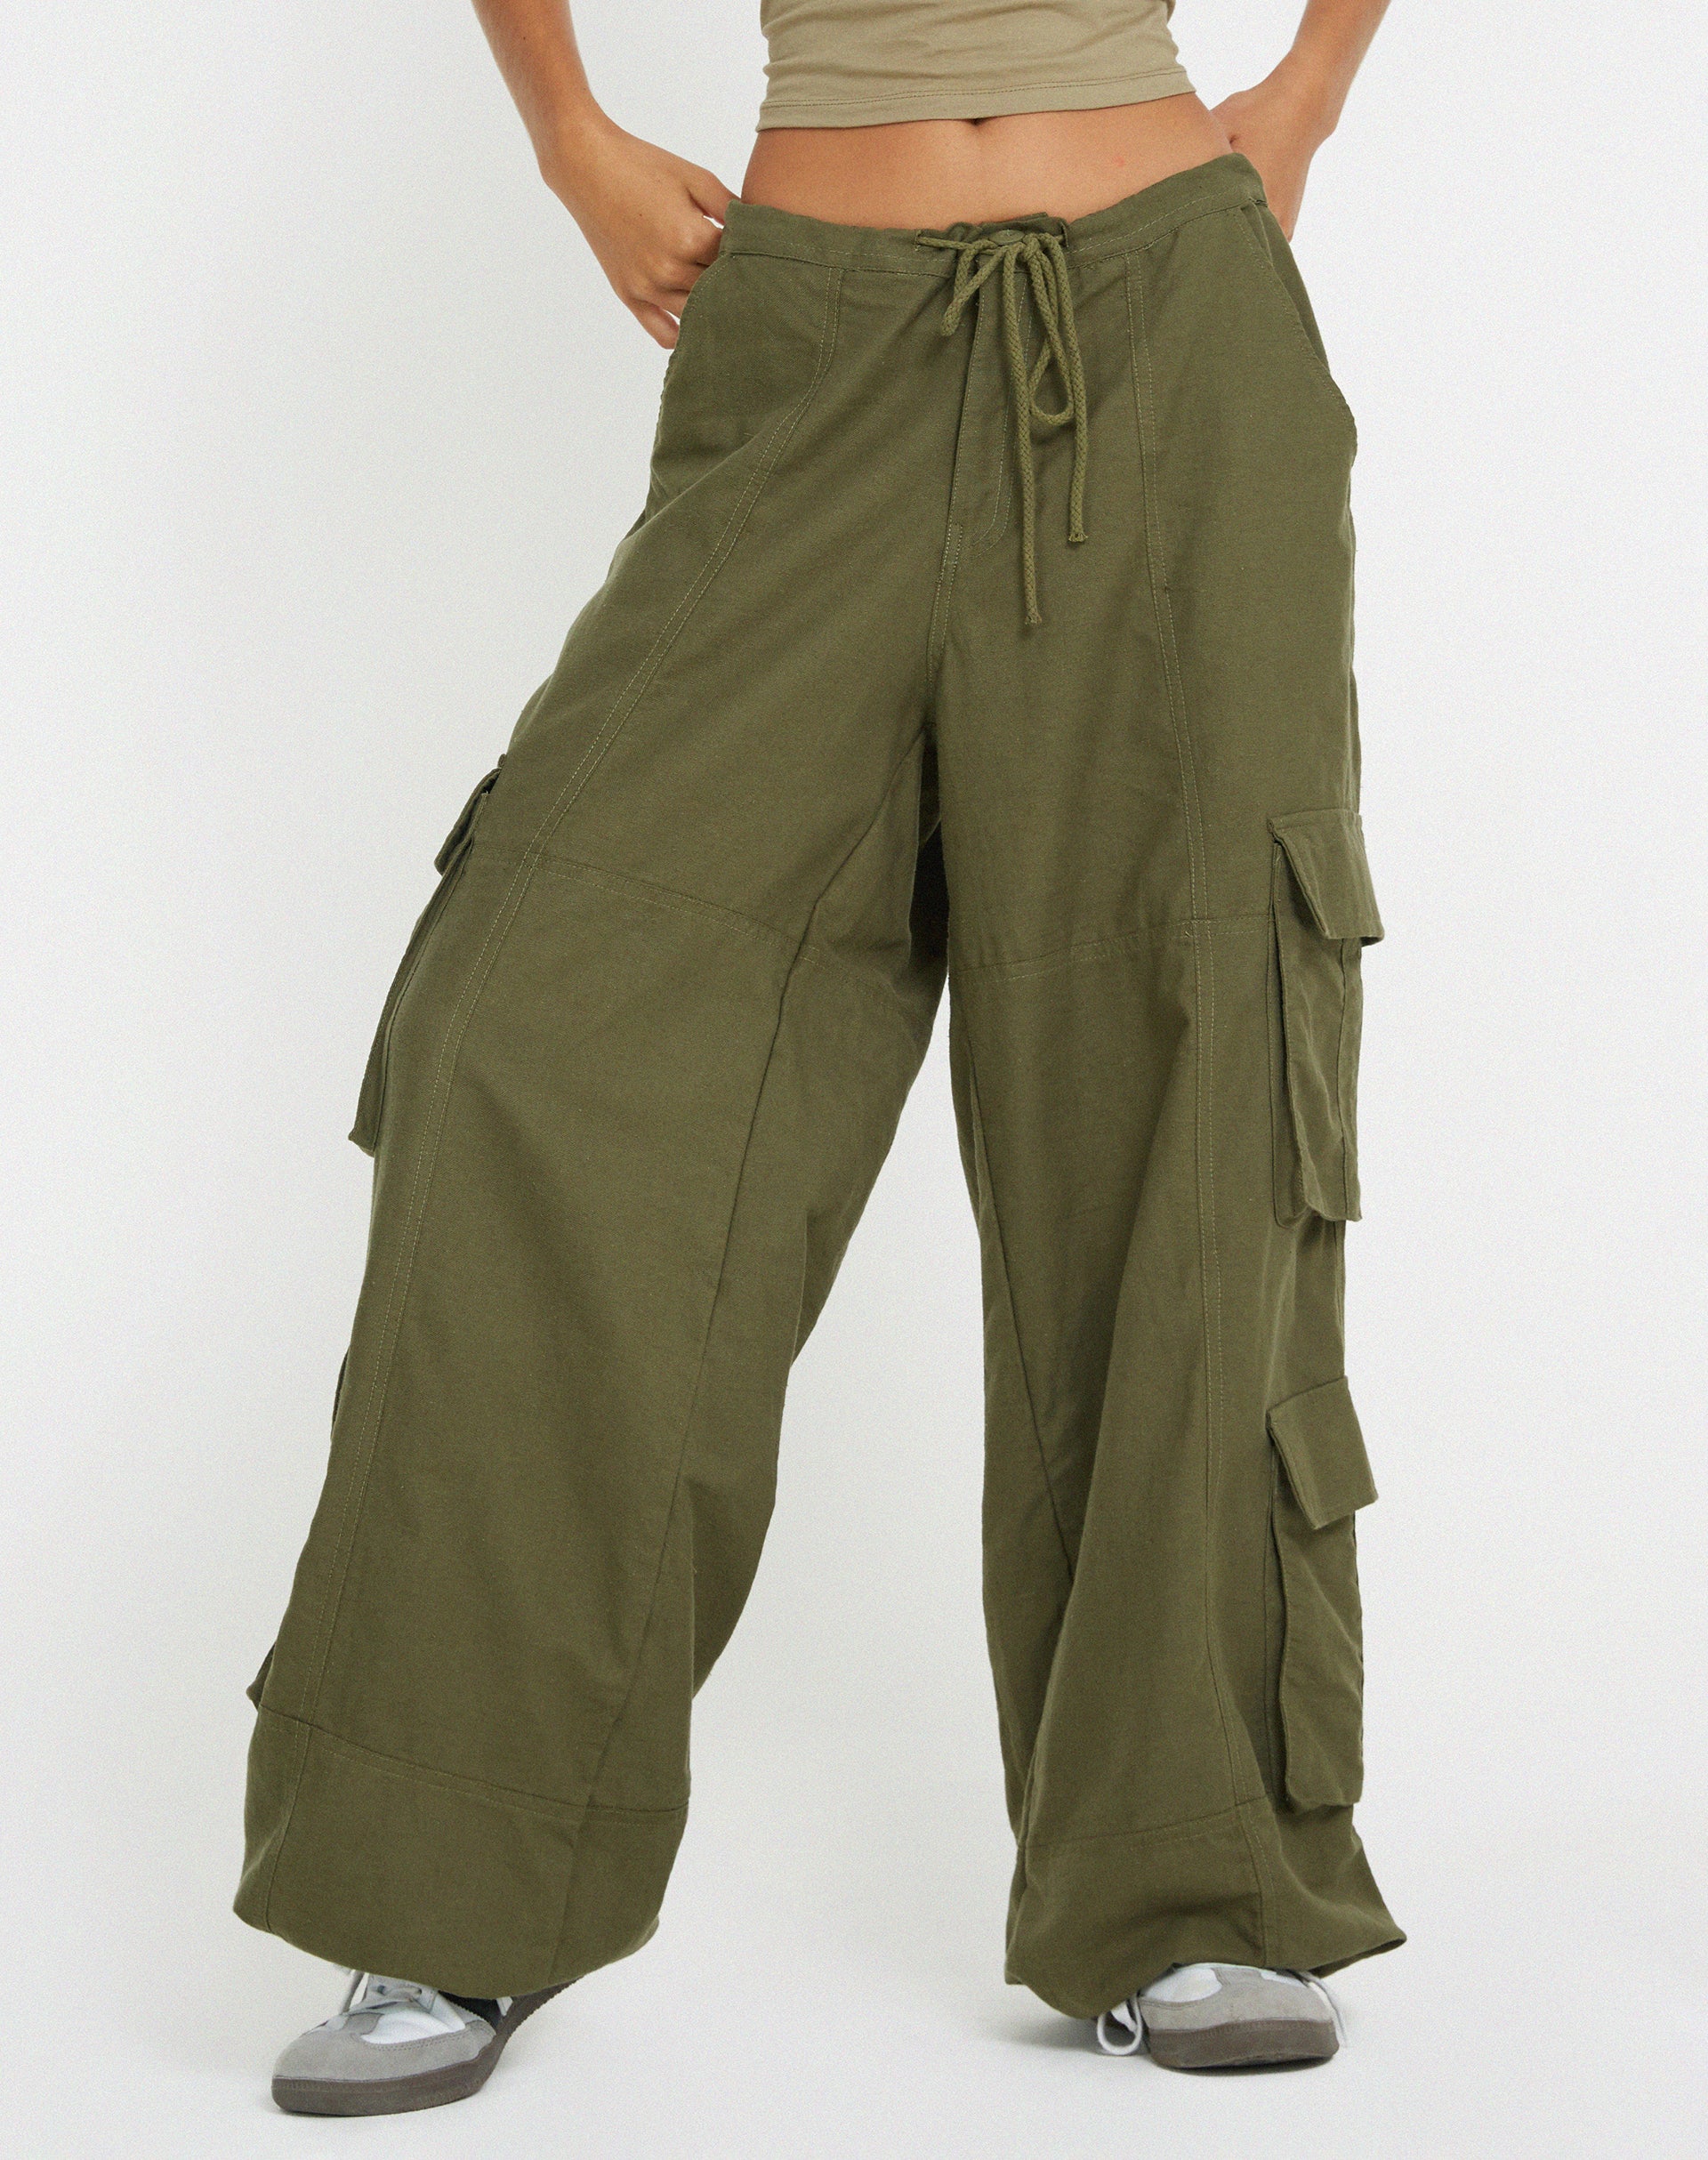 image of Philia Trouser in Loden Green